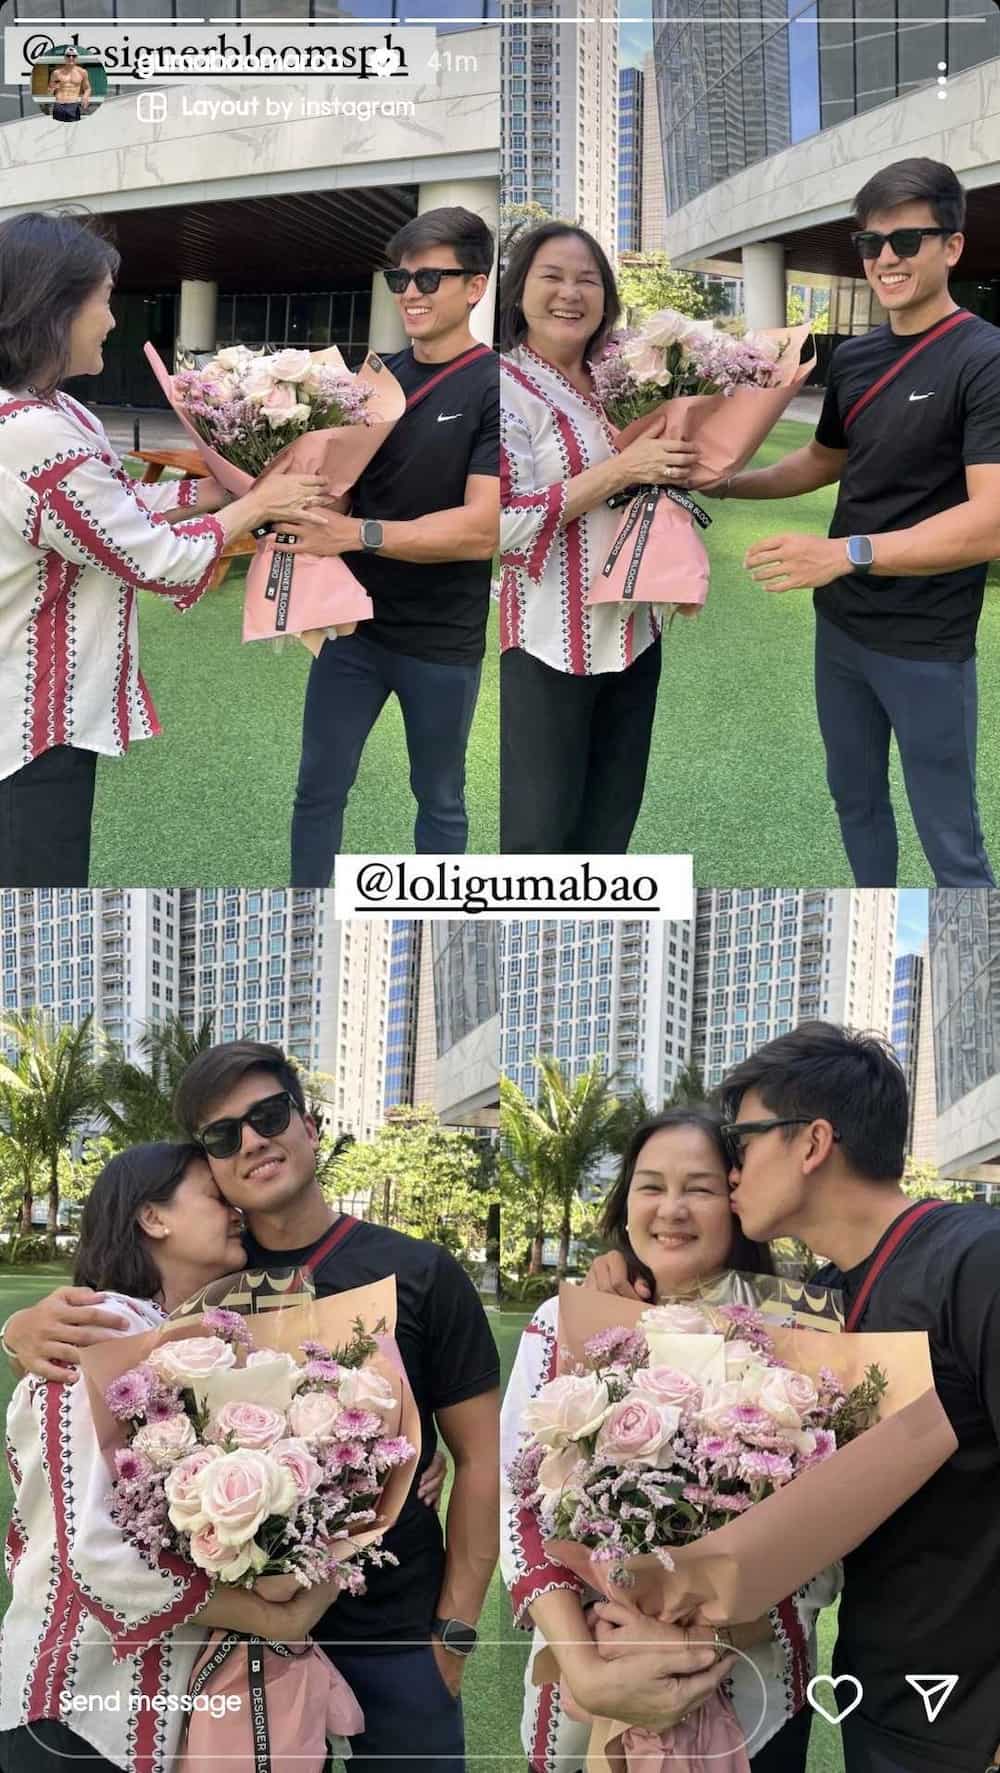 Marco Gumabao honors his mom Loli Gumabao ahead of Mother's Day